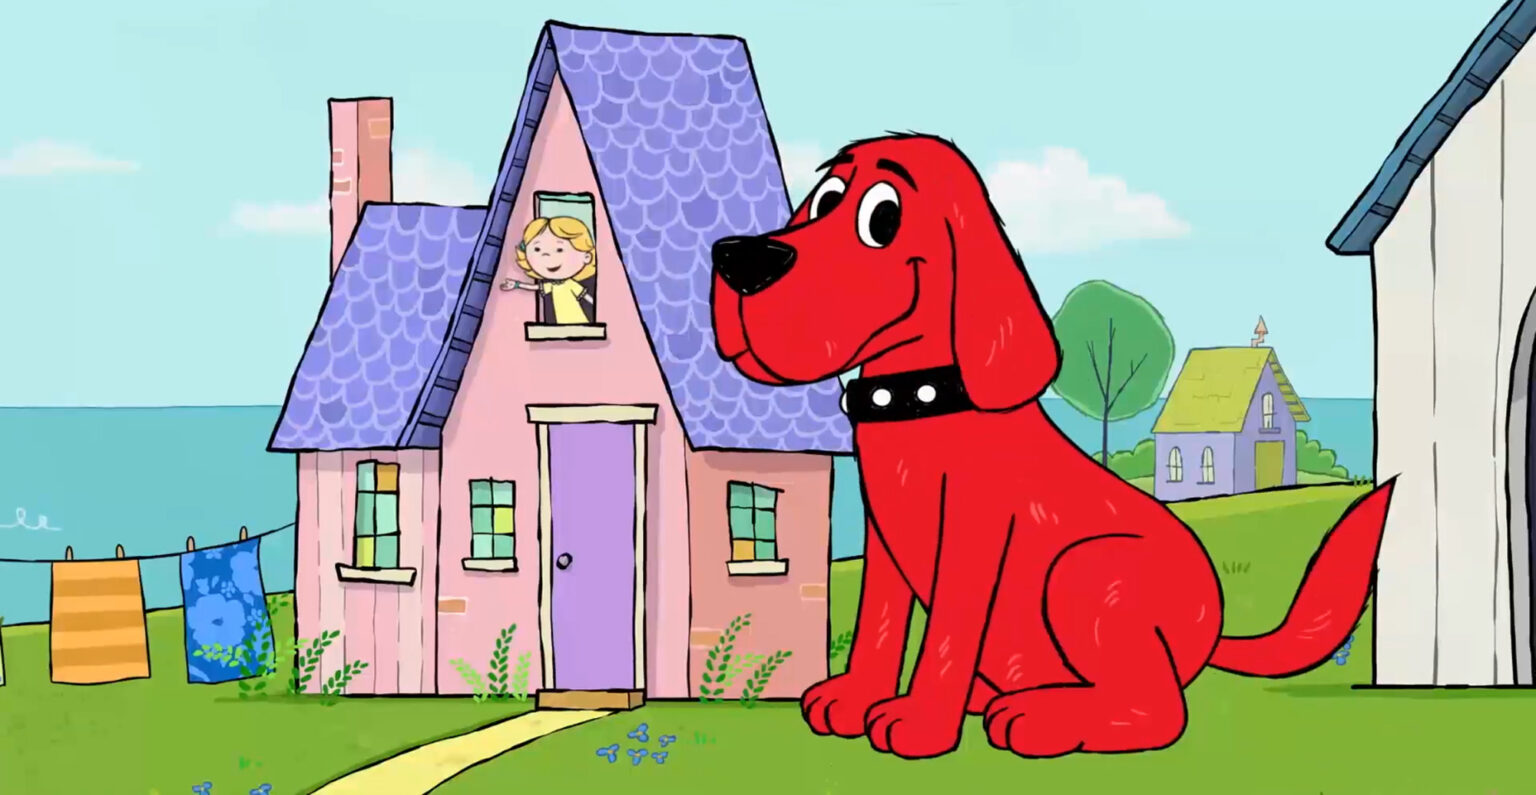 'Clifford the Big Red Dog' is finally coming to the big screen. But are audiences excited for this new movie? Not if it kills their nostalgia!